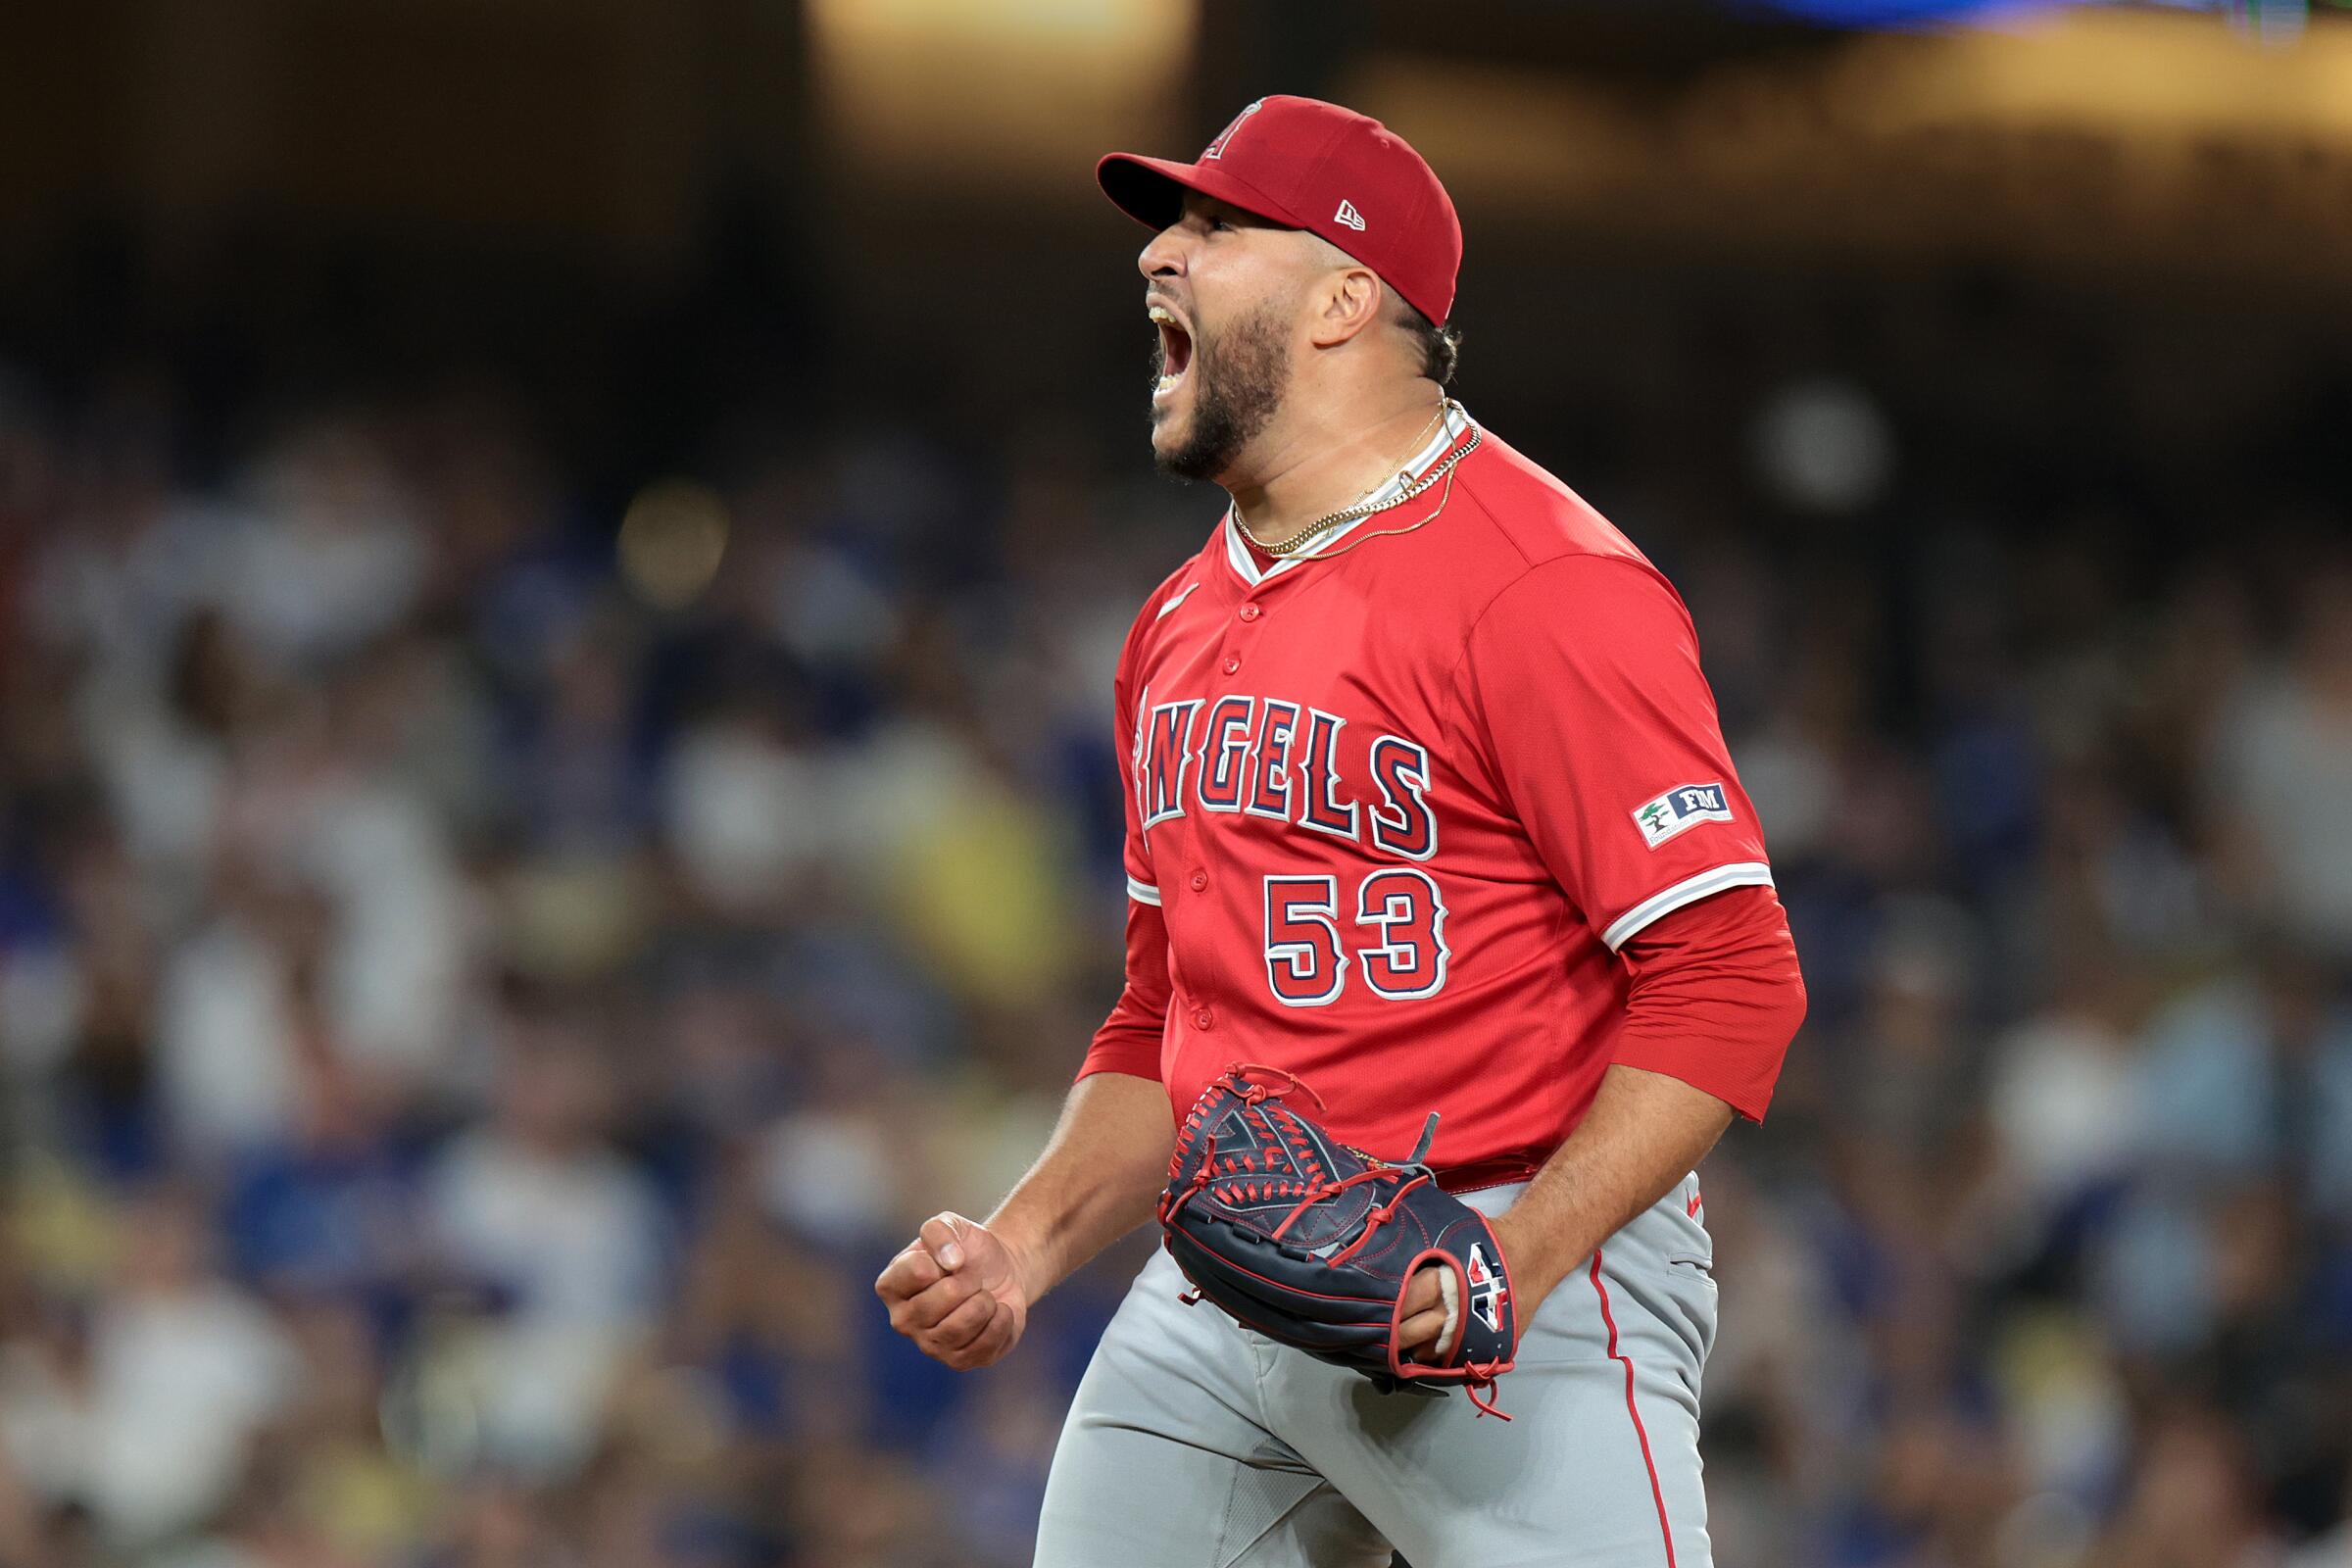 Angels closer Carlos Estévez celebrates after striking out Gavin Lux in the 10th inning.